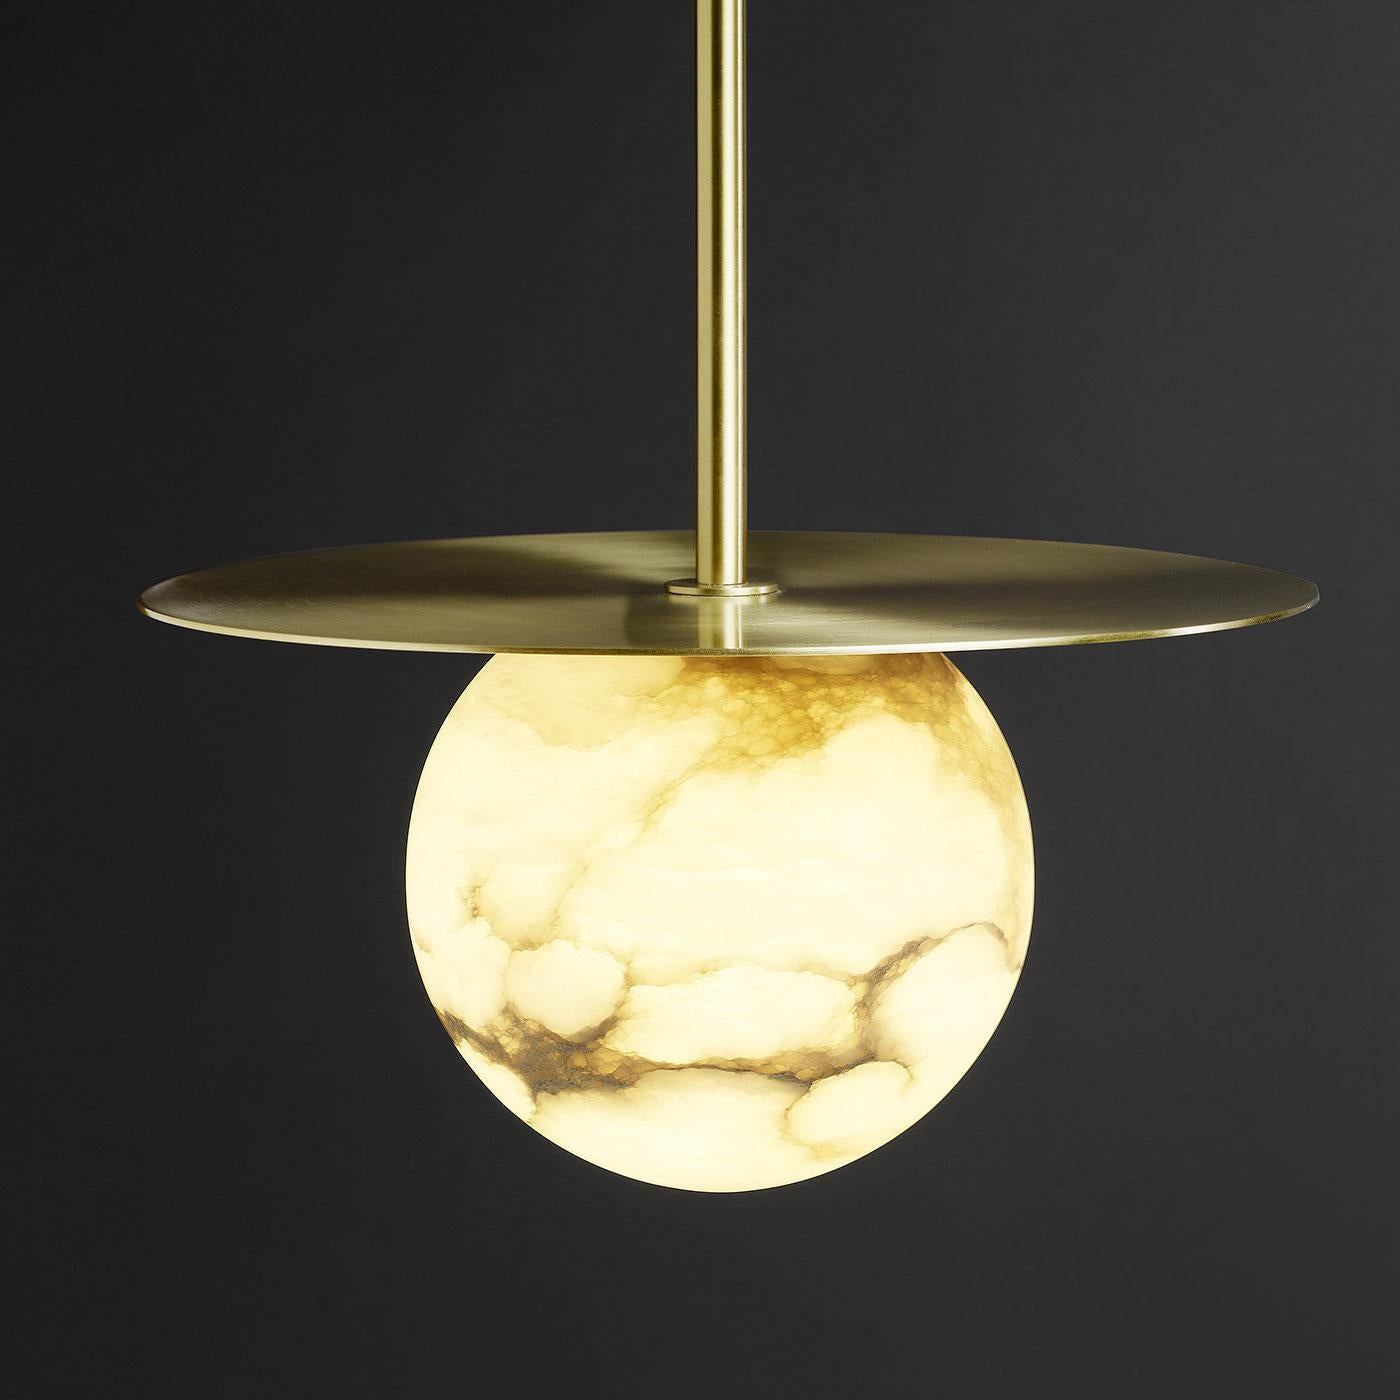 Combining the ethereal allure of alabaster and the warm glow of satin brass, this suspension lamp is a stunning complement to a refined interior. The warm light shines on the one-of-a-kind veins of the stone, creating a captivating effect, while the